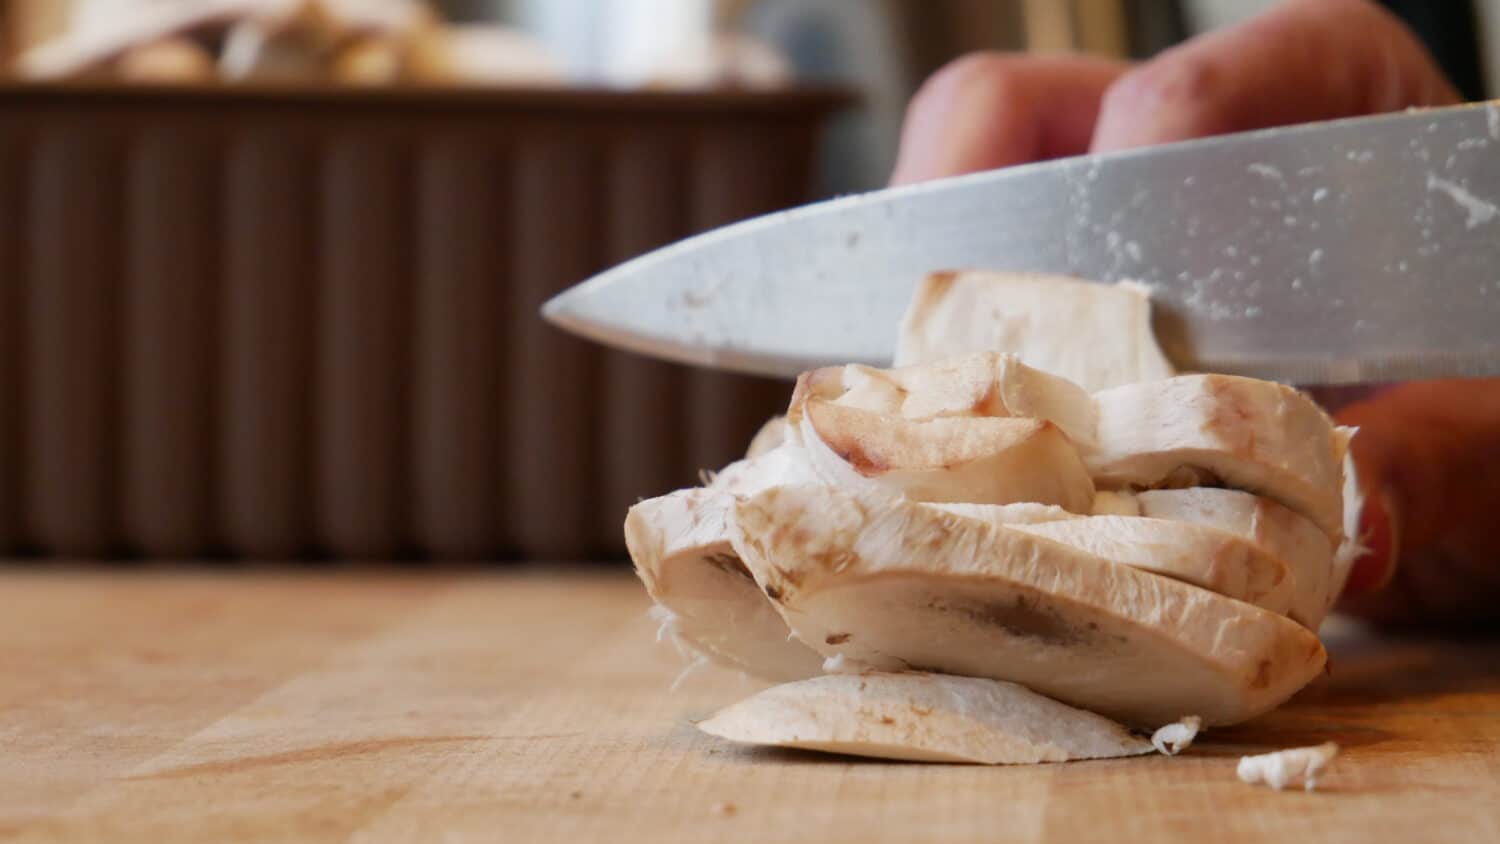 Chopping and slicing mushrooms with a sharp chef's knife on a wooden cutting board